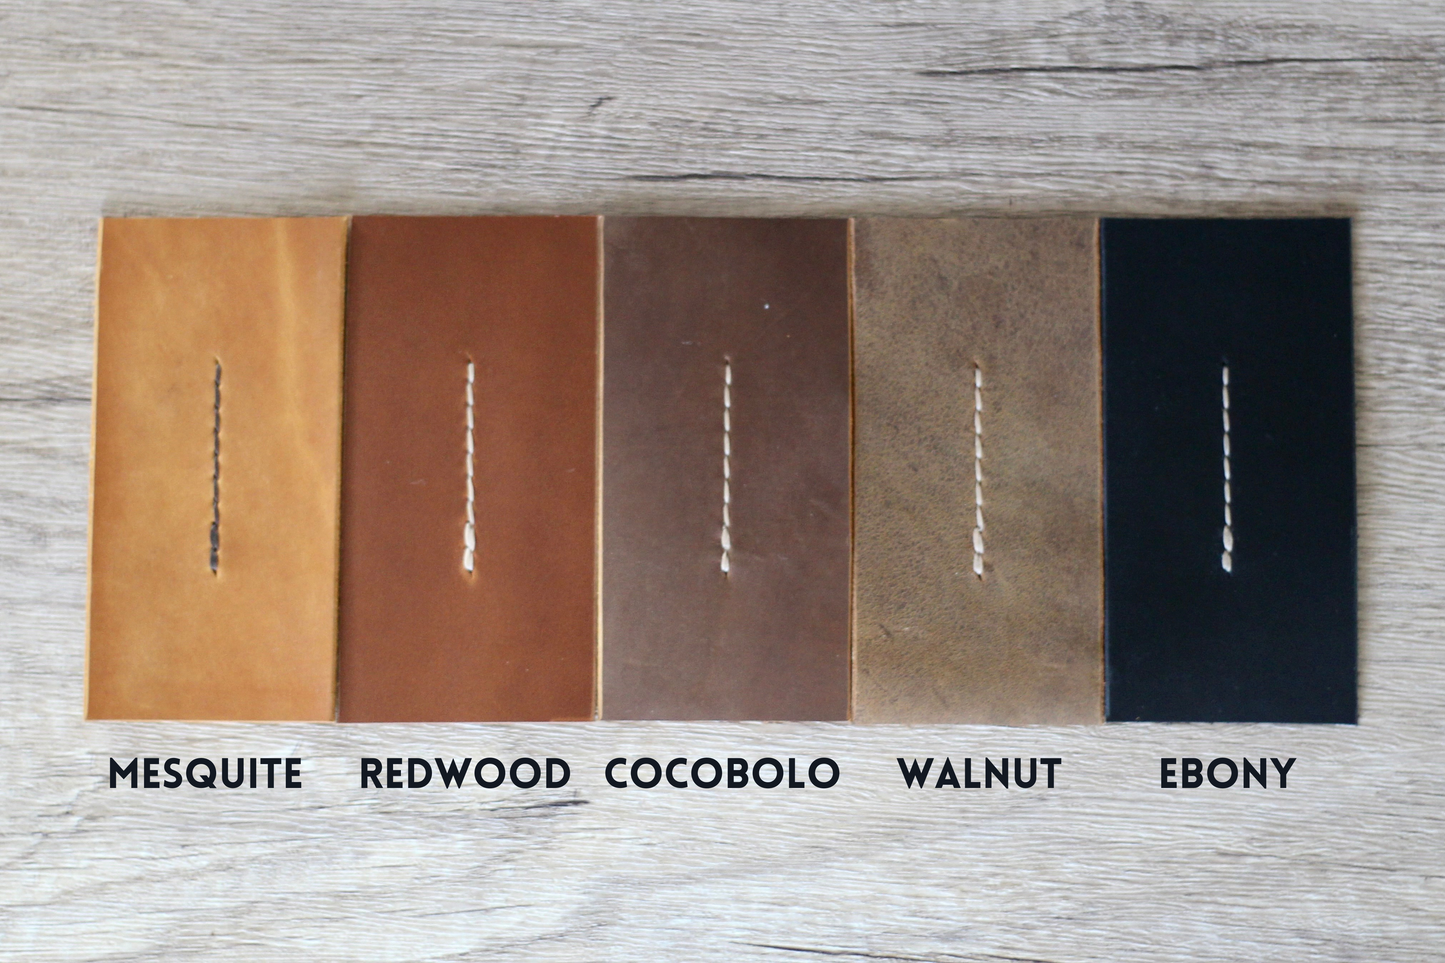 Leather Color Swatches. From left to right, Mesquite, Redwood, Cocobolo, Walnut, and Ebony.